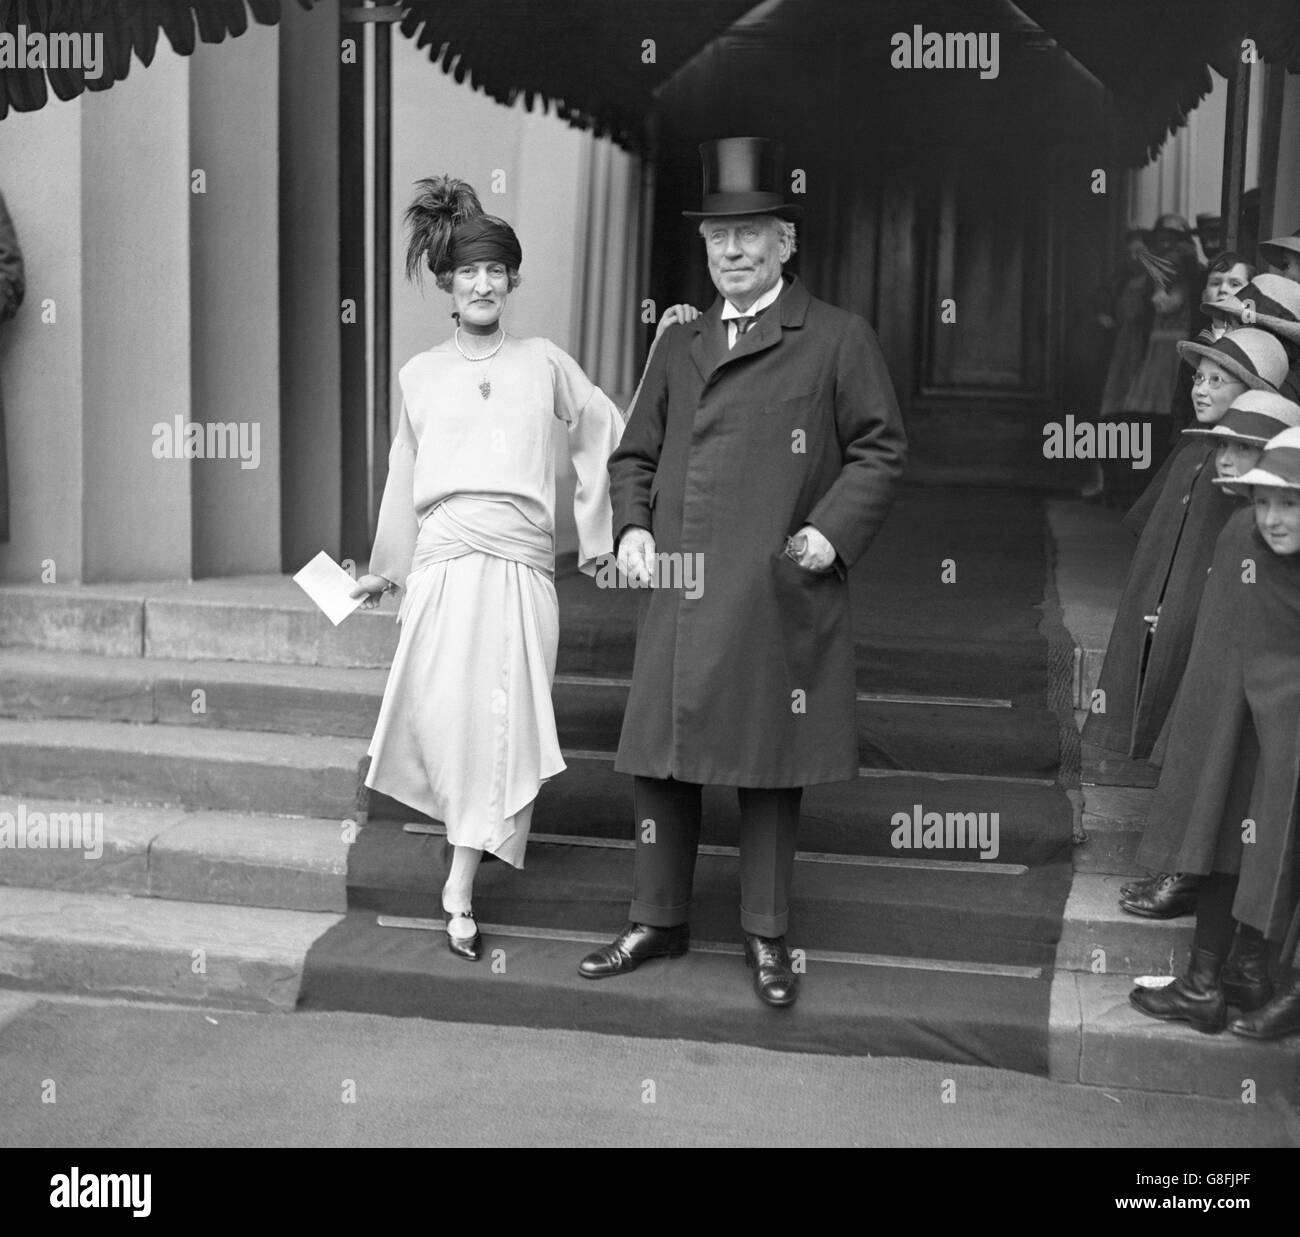 Leader of the Liberal party and former Prime Minister H. H. Asquith, with Mrs Asquith, leaving the wedding of the Hon. Diamond Hardinge and Capt. R Abercromby MC at the Guards Chapel in Wellington Barracks, London. Stock Photo